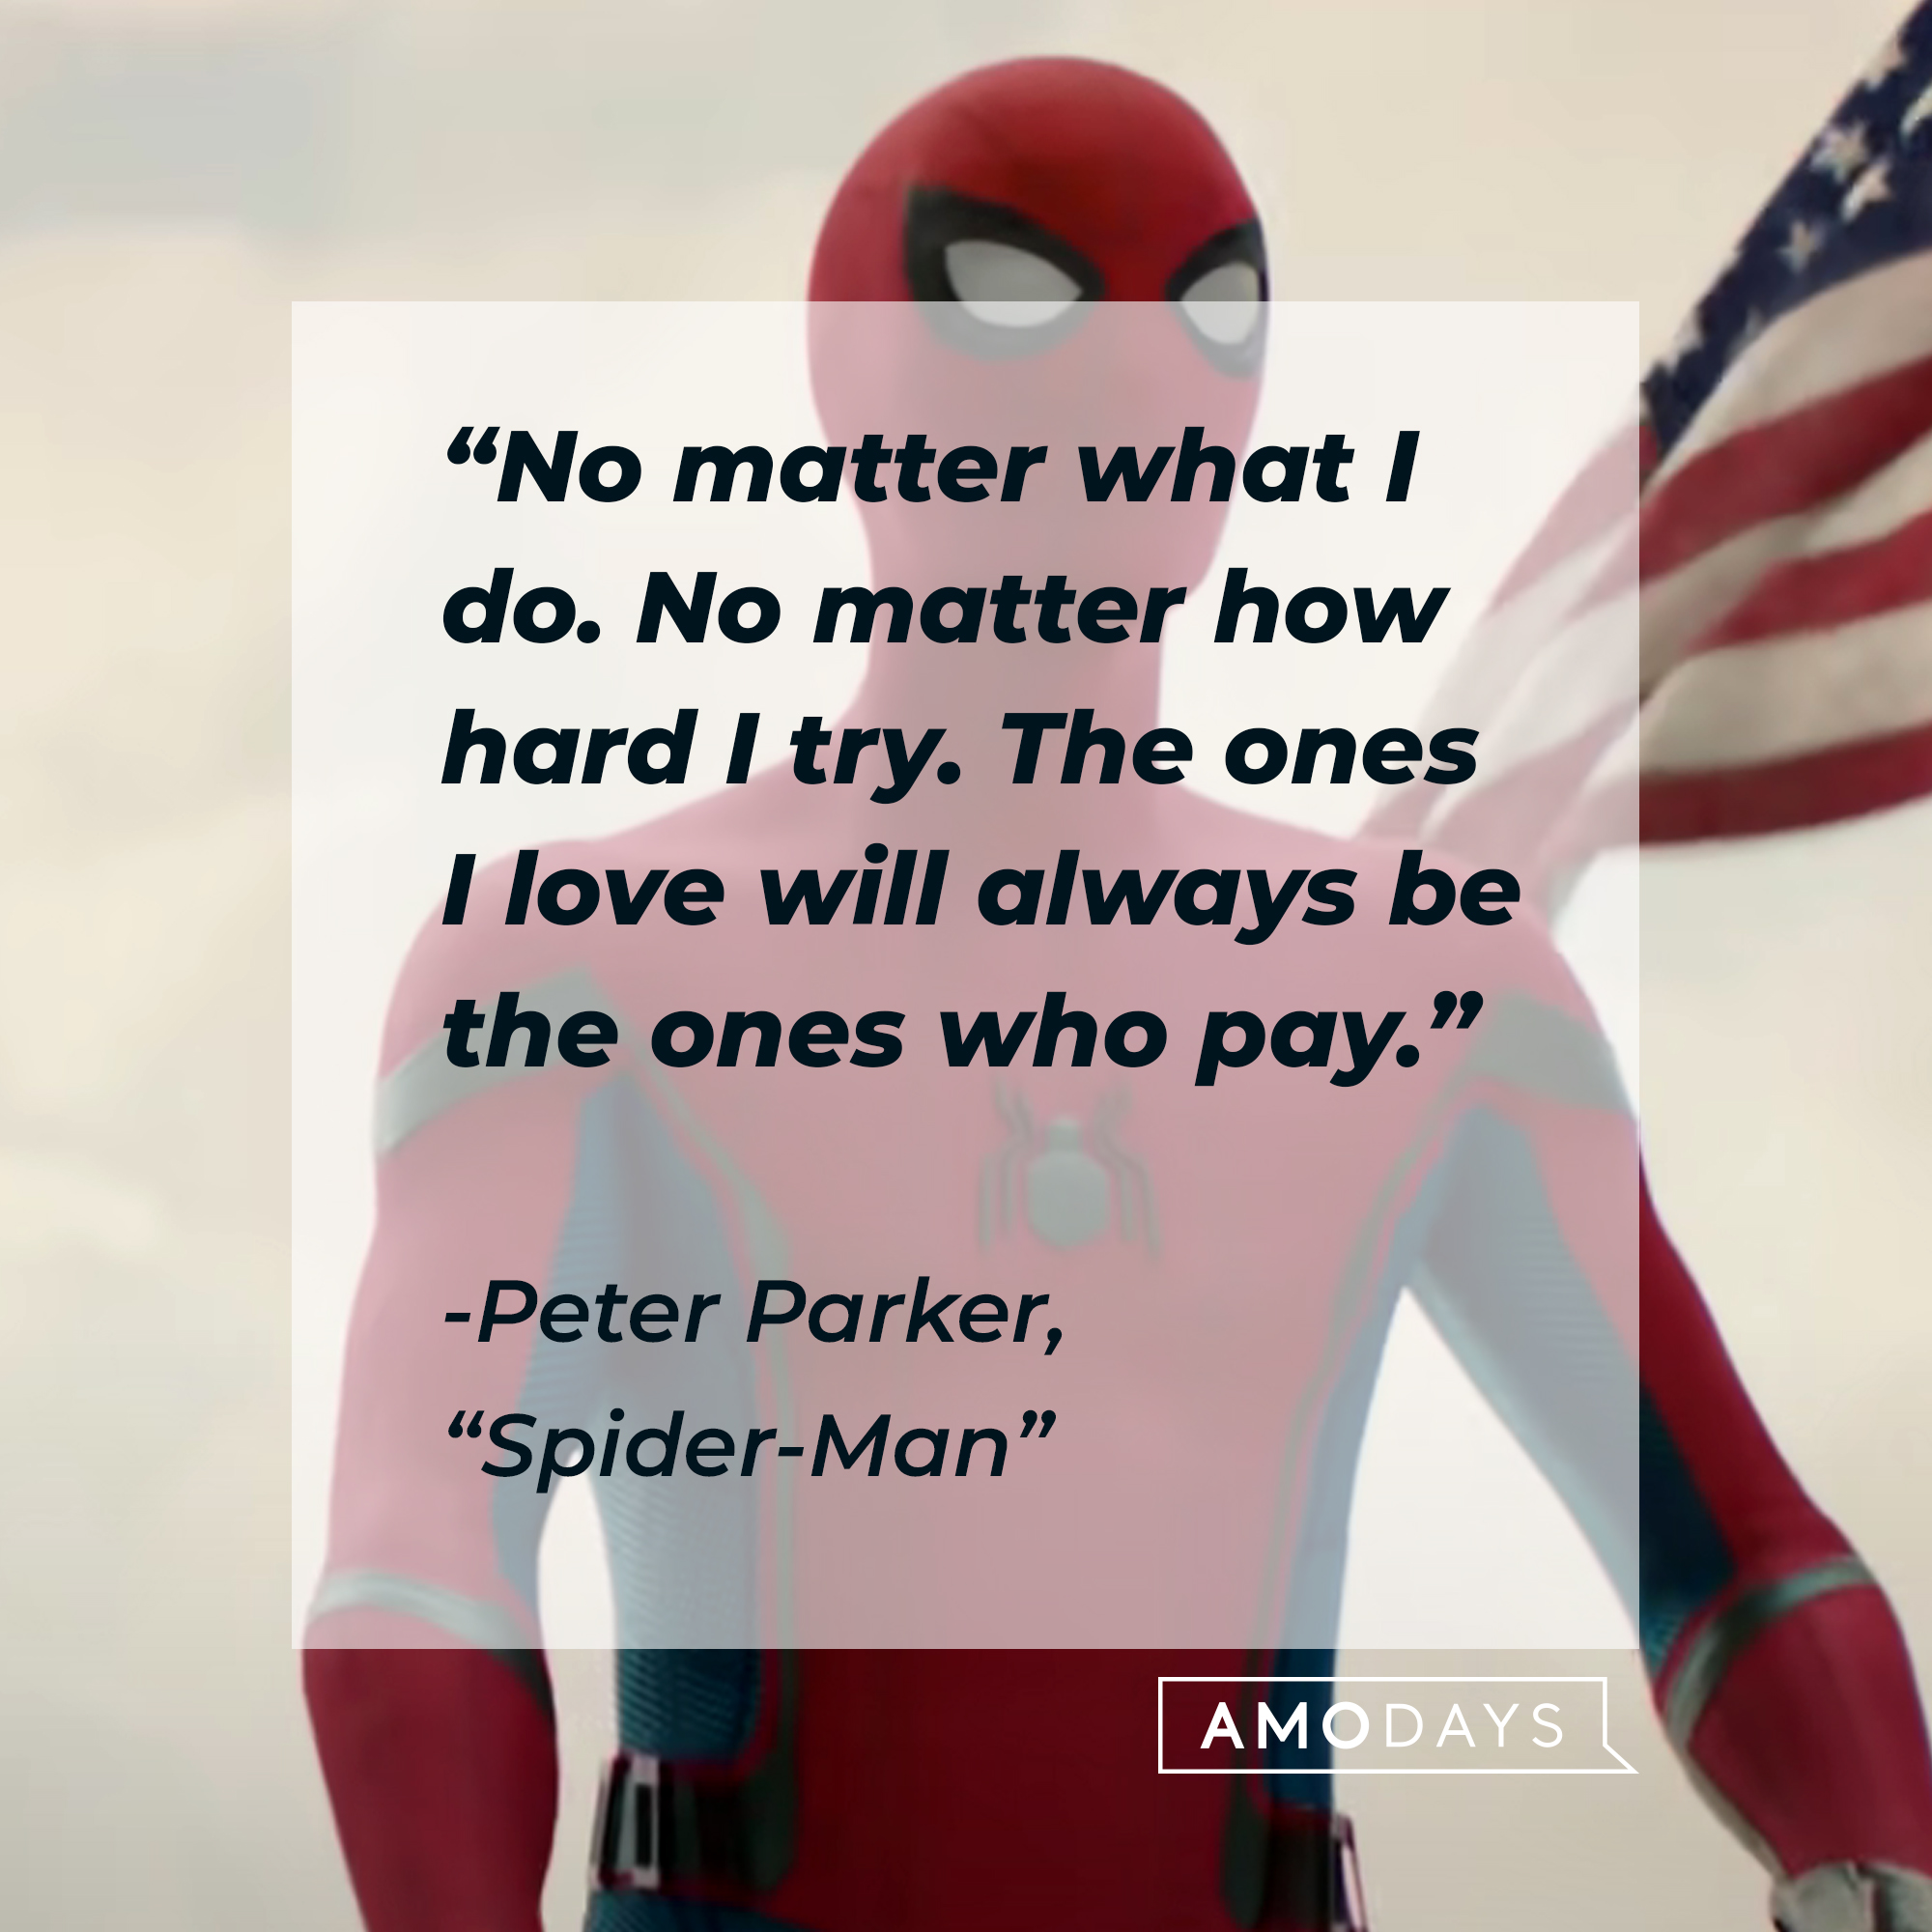 Spider-Man's quote from "Spider-Man:" “No matter what I do. No matter how hard I try, the ones I love will always be the ones who pay.”  | Source: Facebook.com/SpiderManMovie